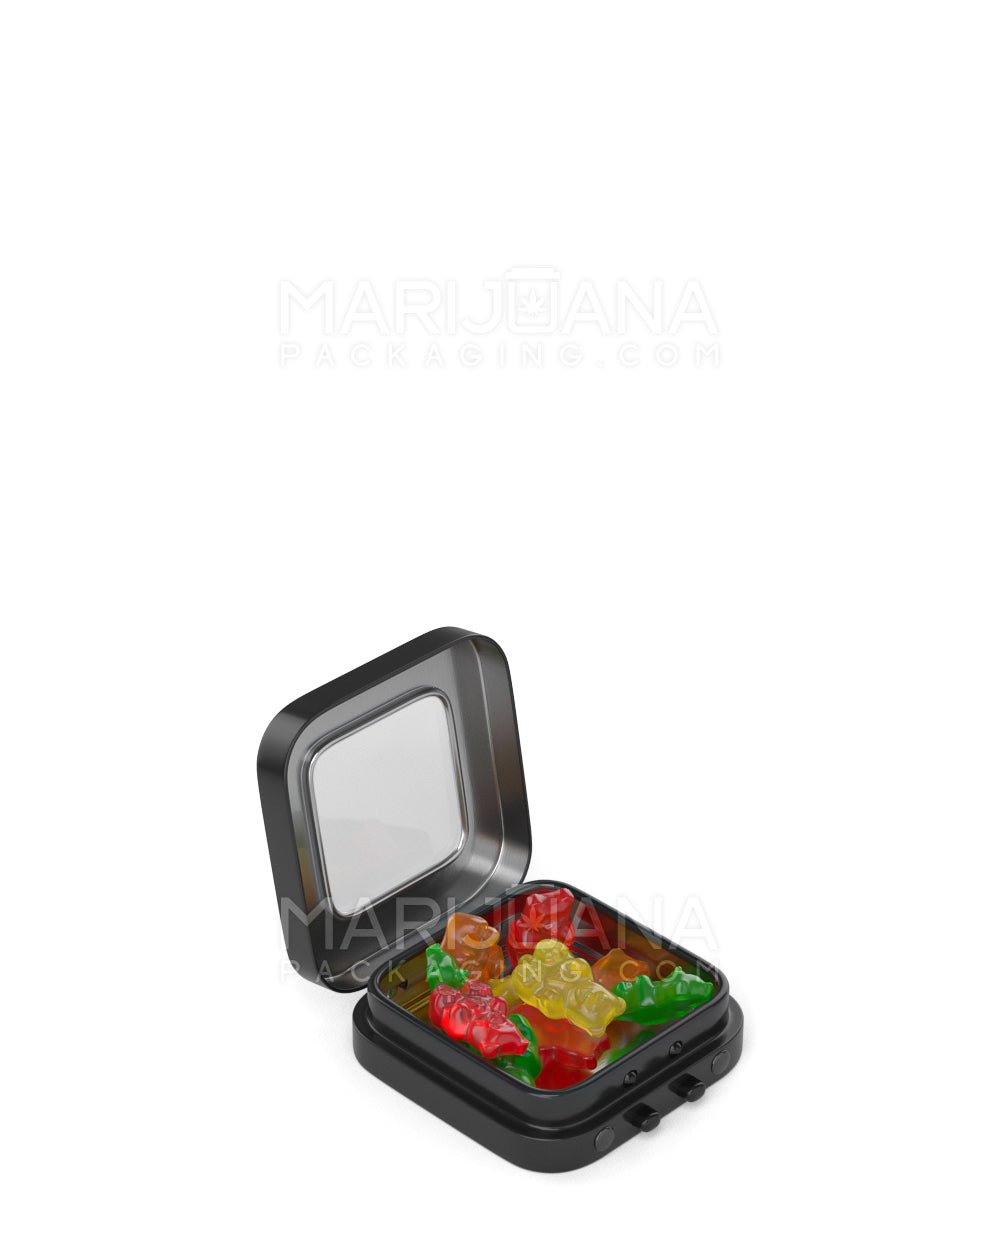 Child Resistant & Sustainable | Hinged-Lid Micro Size Vista Edible & Joint Box w/ See-Through Window |  Black Tin  - 2